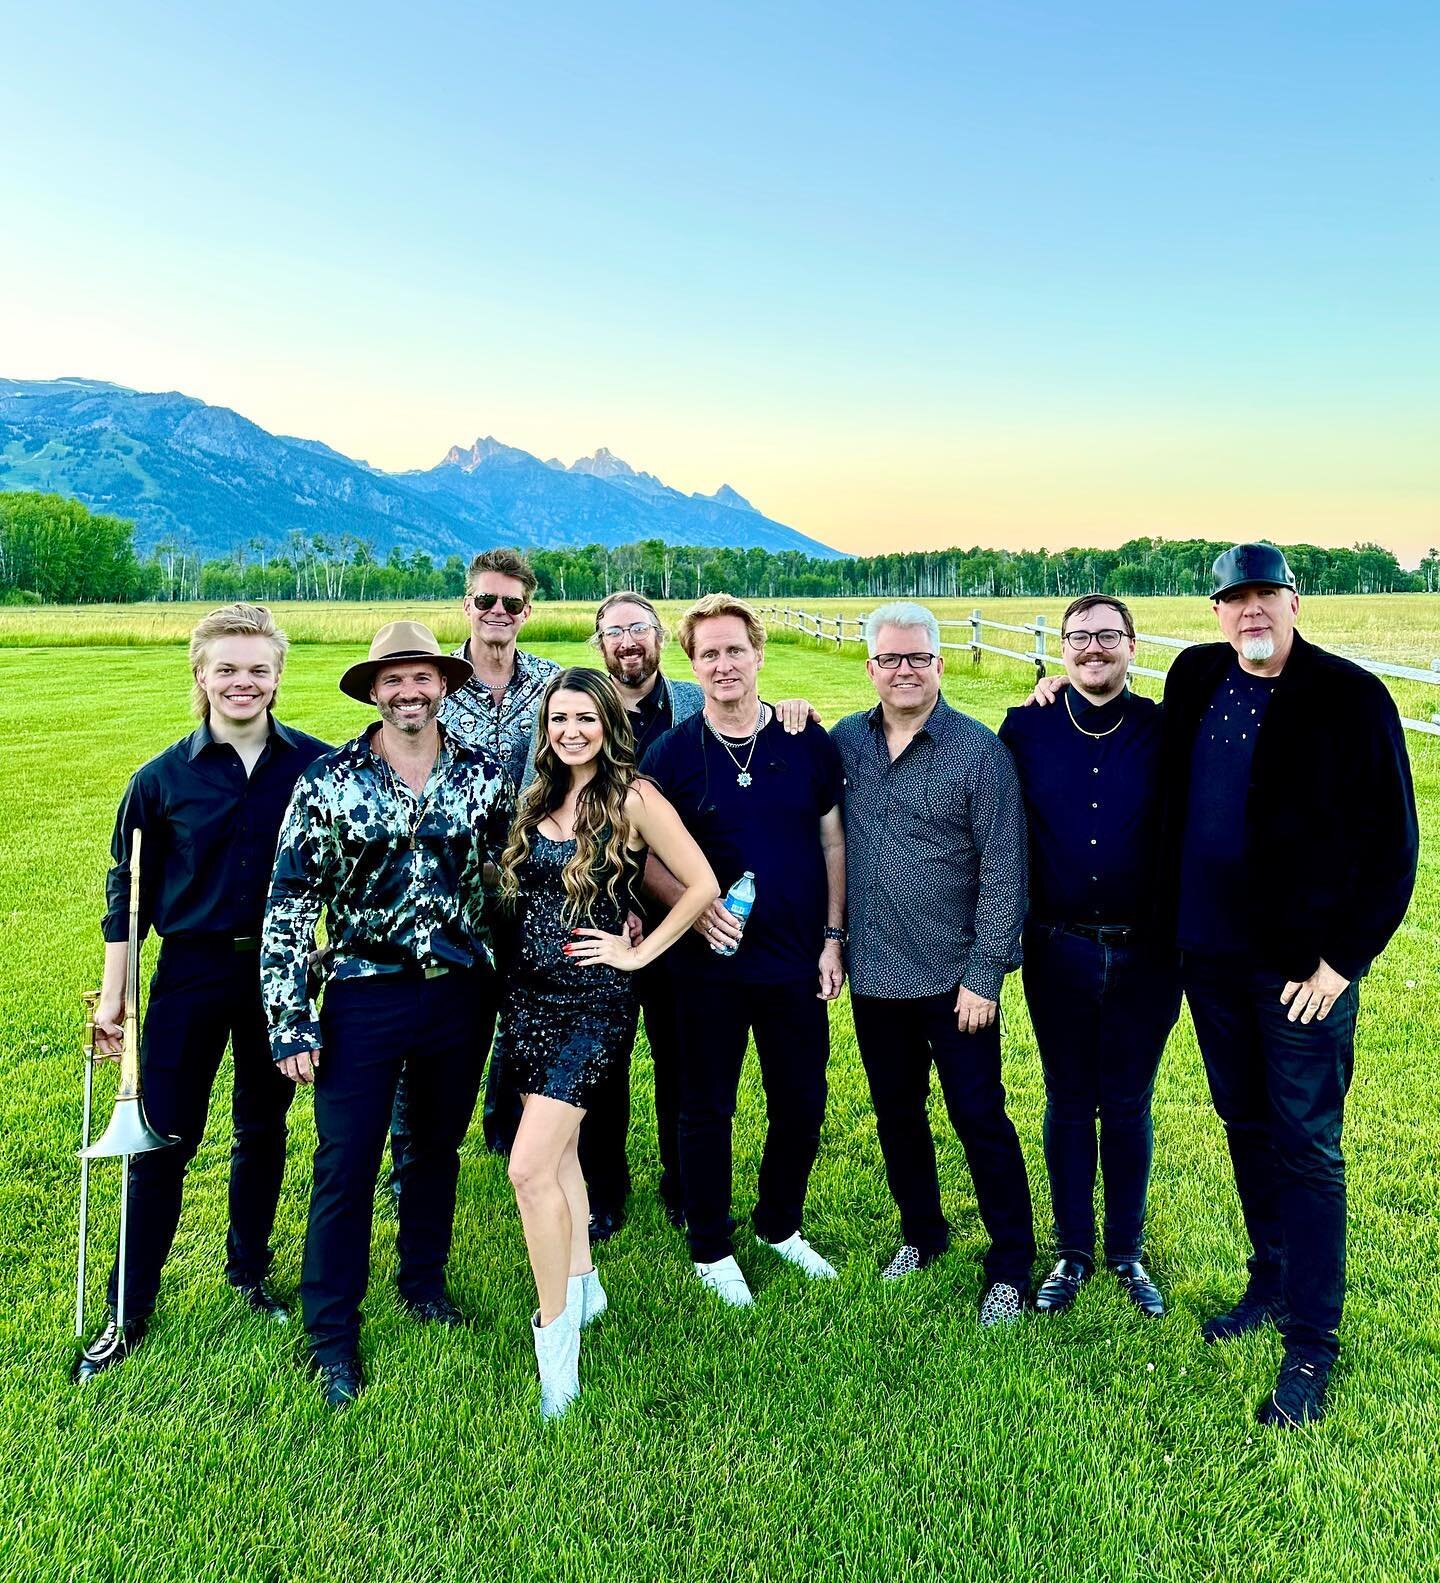 The views from Jackson Hole never disappoint. We love this country 🥰😍

&bull;
&bull;
&bull;
&bull;

#livemusic #band #musicians #vocalists #musiclovers #show #events #corporate #conventions #concerts #eventplanner #luxury #destinationweddings #wedd